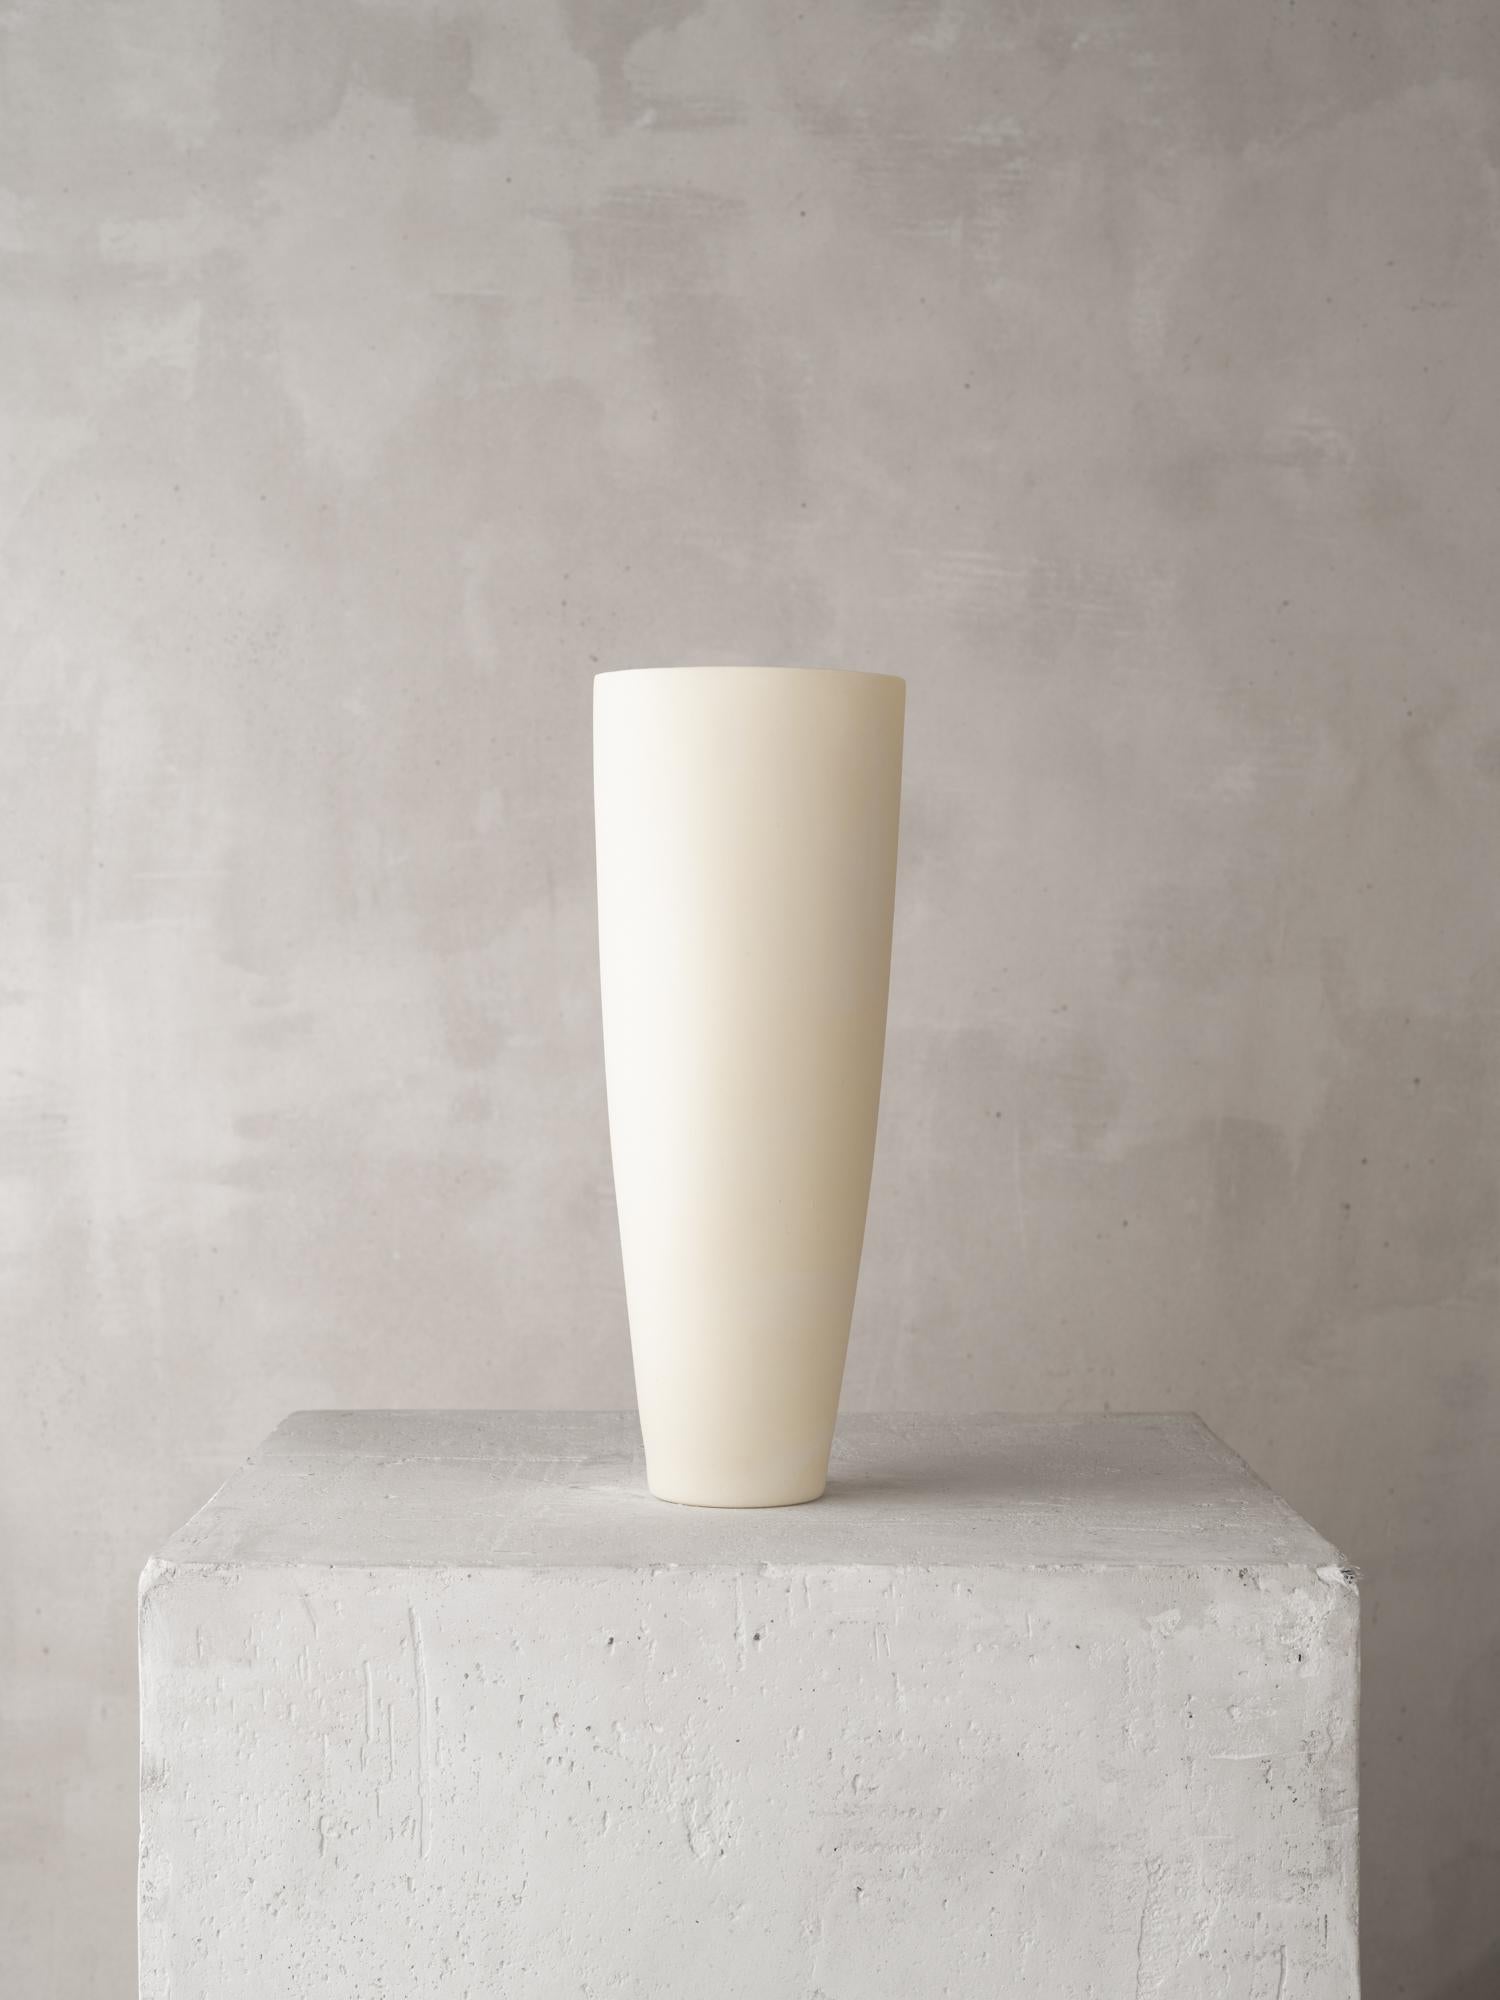 Materials: Cast Porcelain with Colored Oxide
Unique Work  Signed by the Artist

For over forty years Katherine Glenday has been creating meditative ceramic and porcelain pieces by hand in her South African studio. Remarkable in their translucency